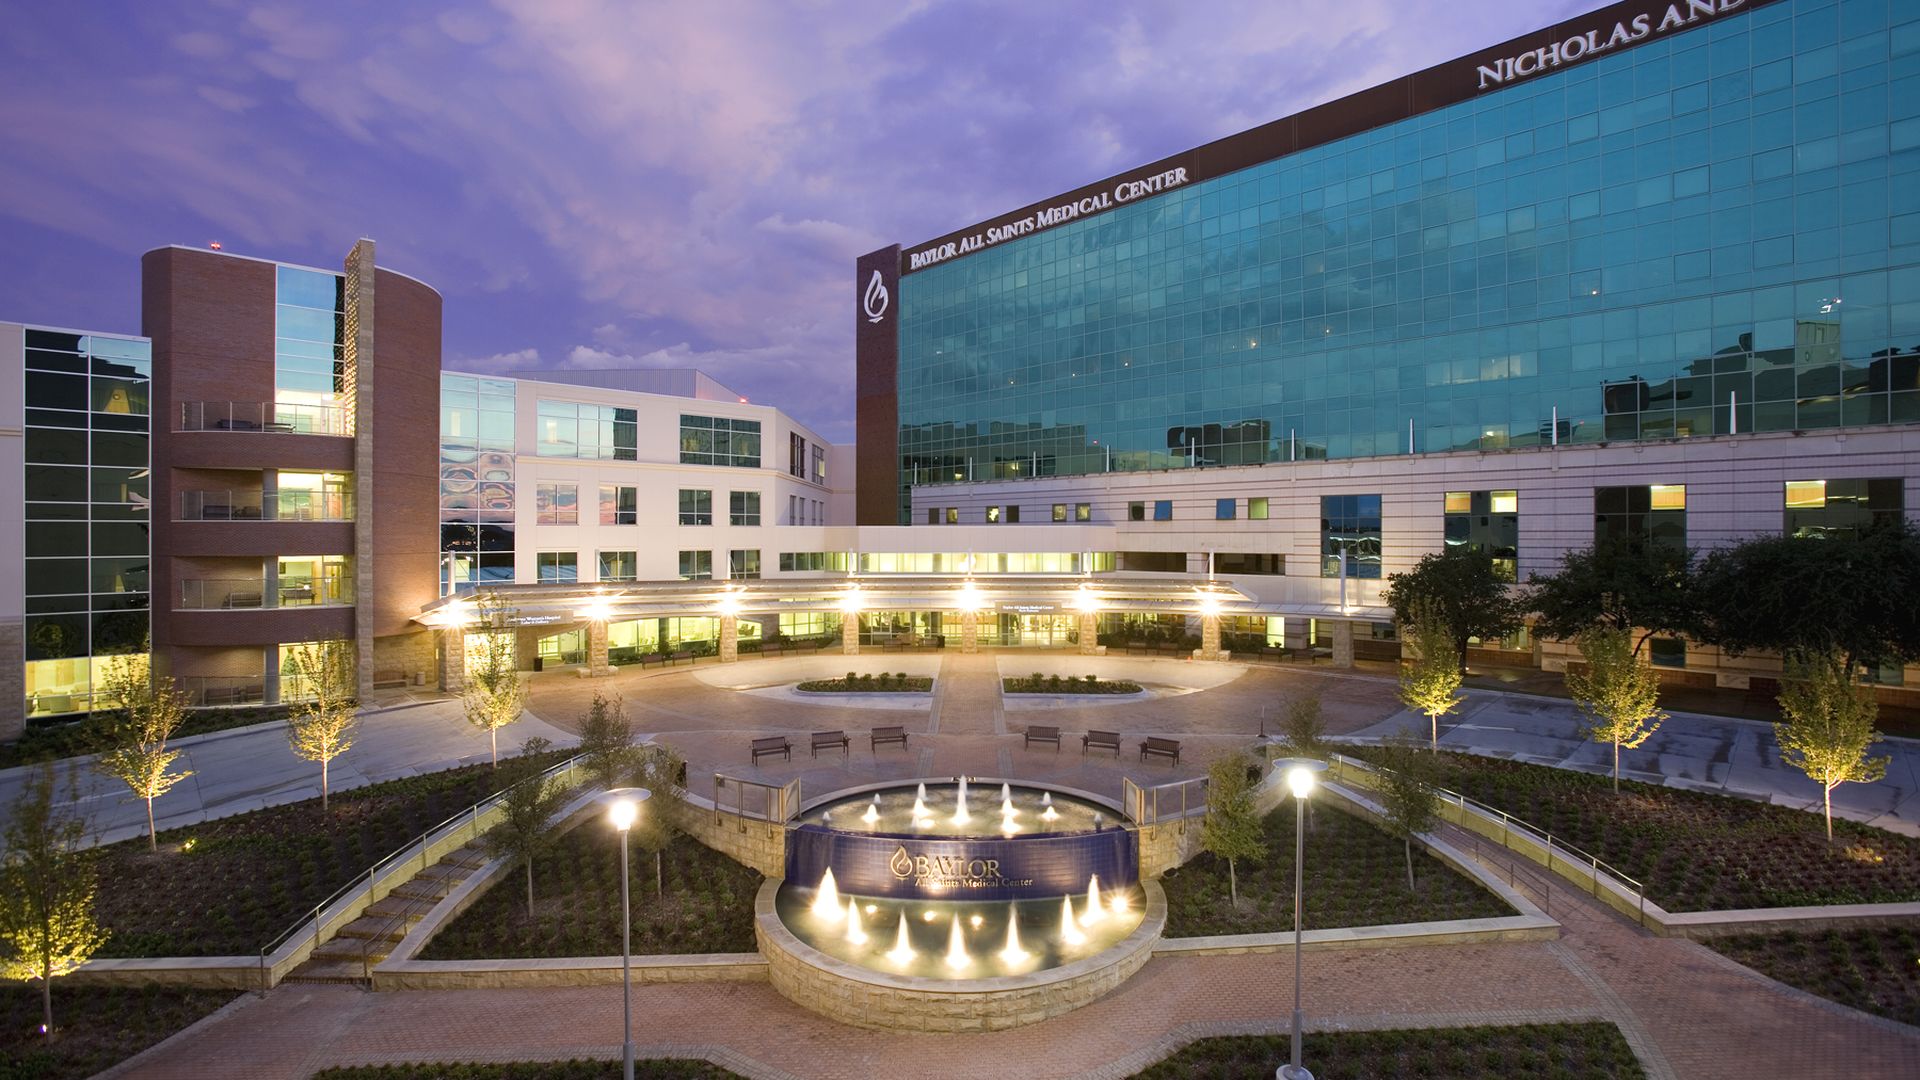 A Baylor Scott & White hospital in Texas at twilight.